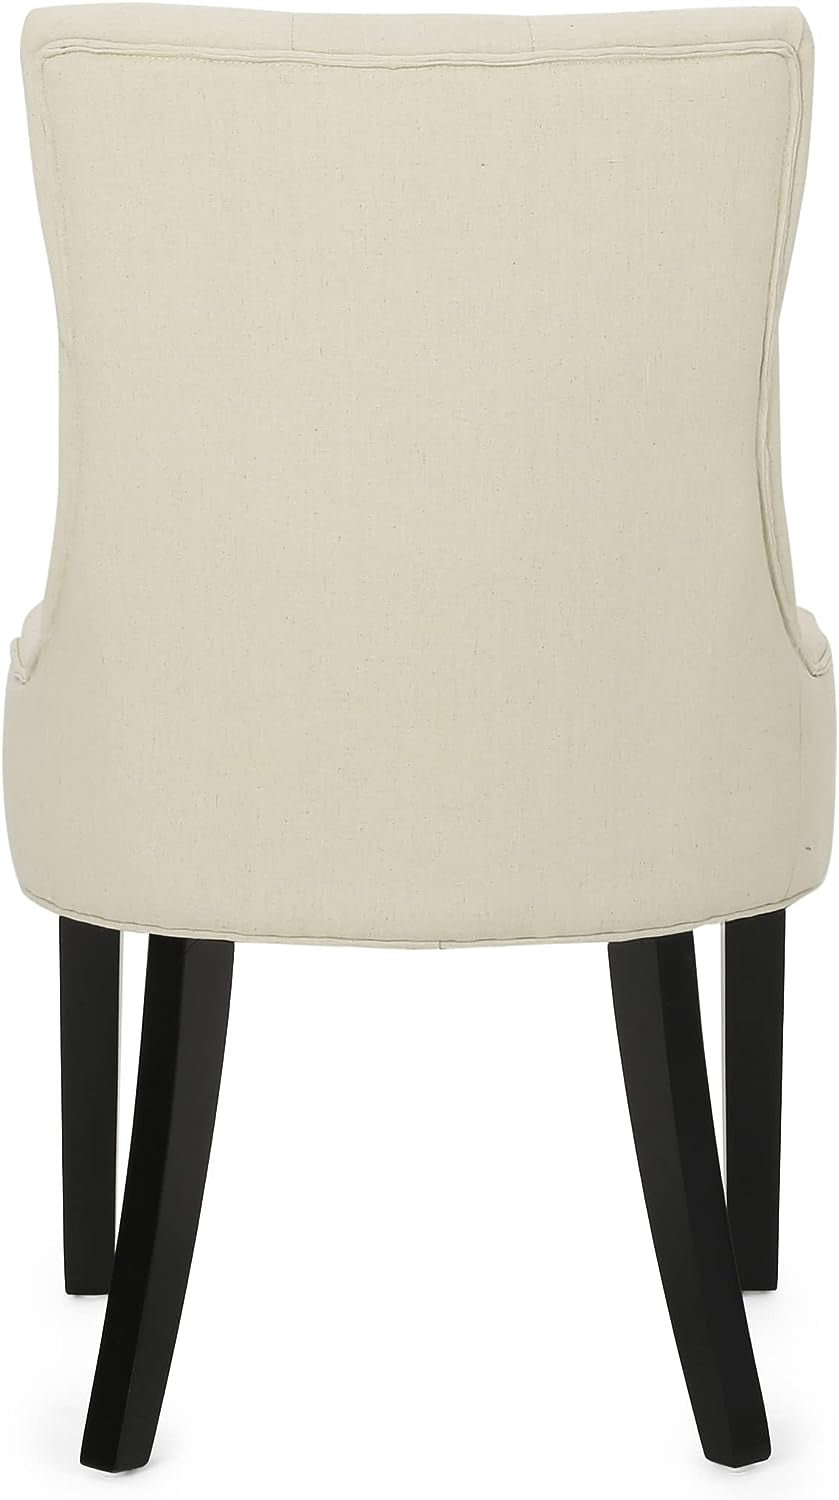 Hayden Tufted Fabric Dining / Accent Chairs, 2-Pcs Set, Beige